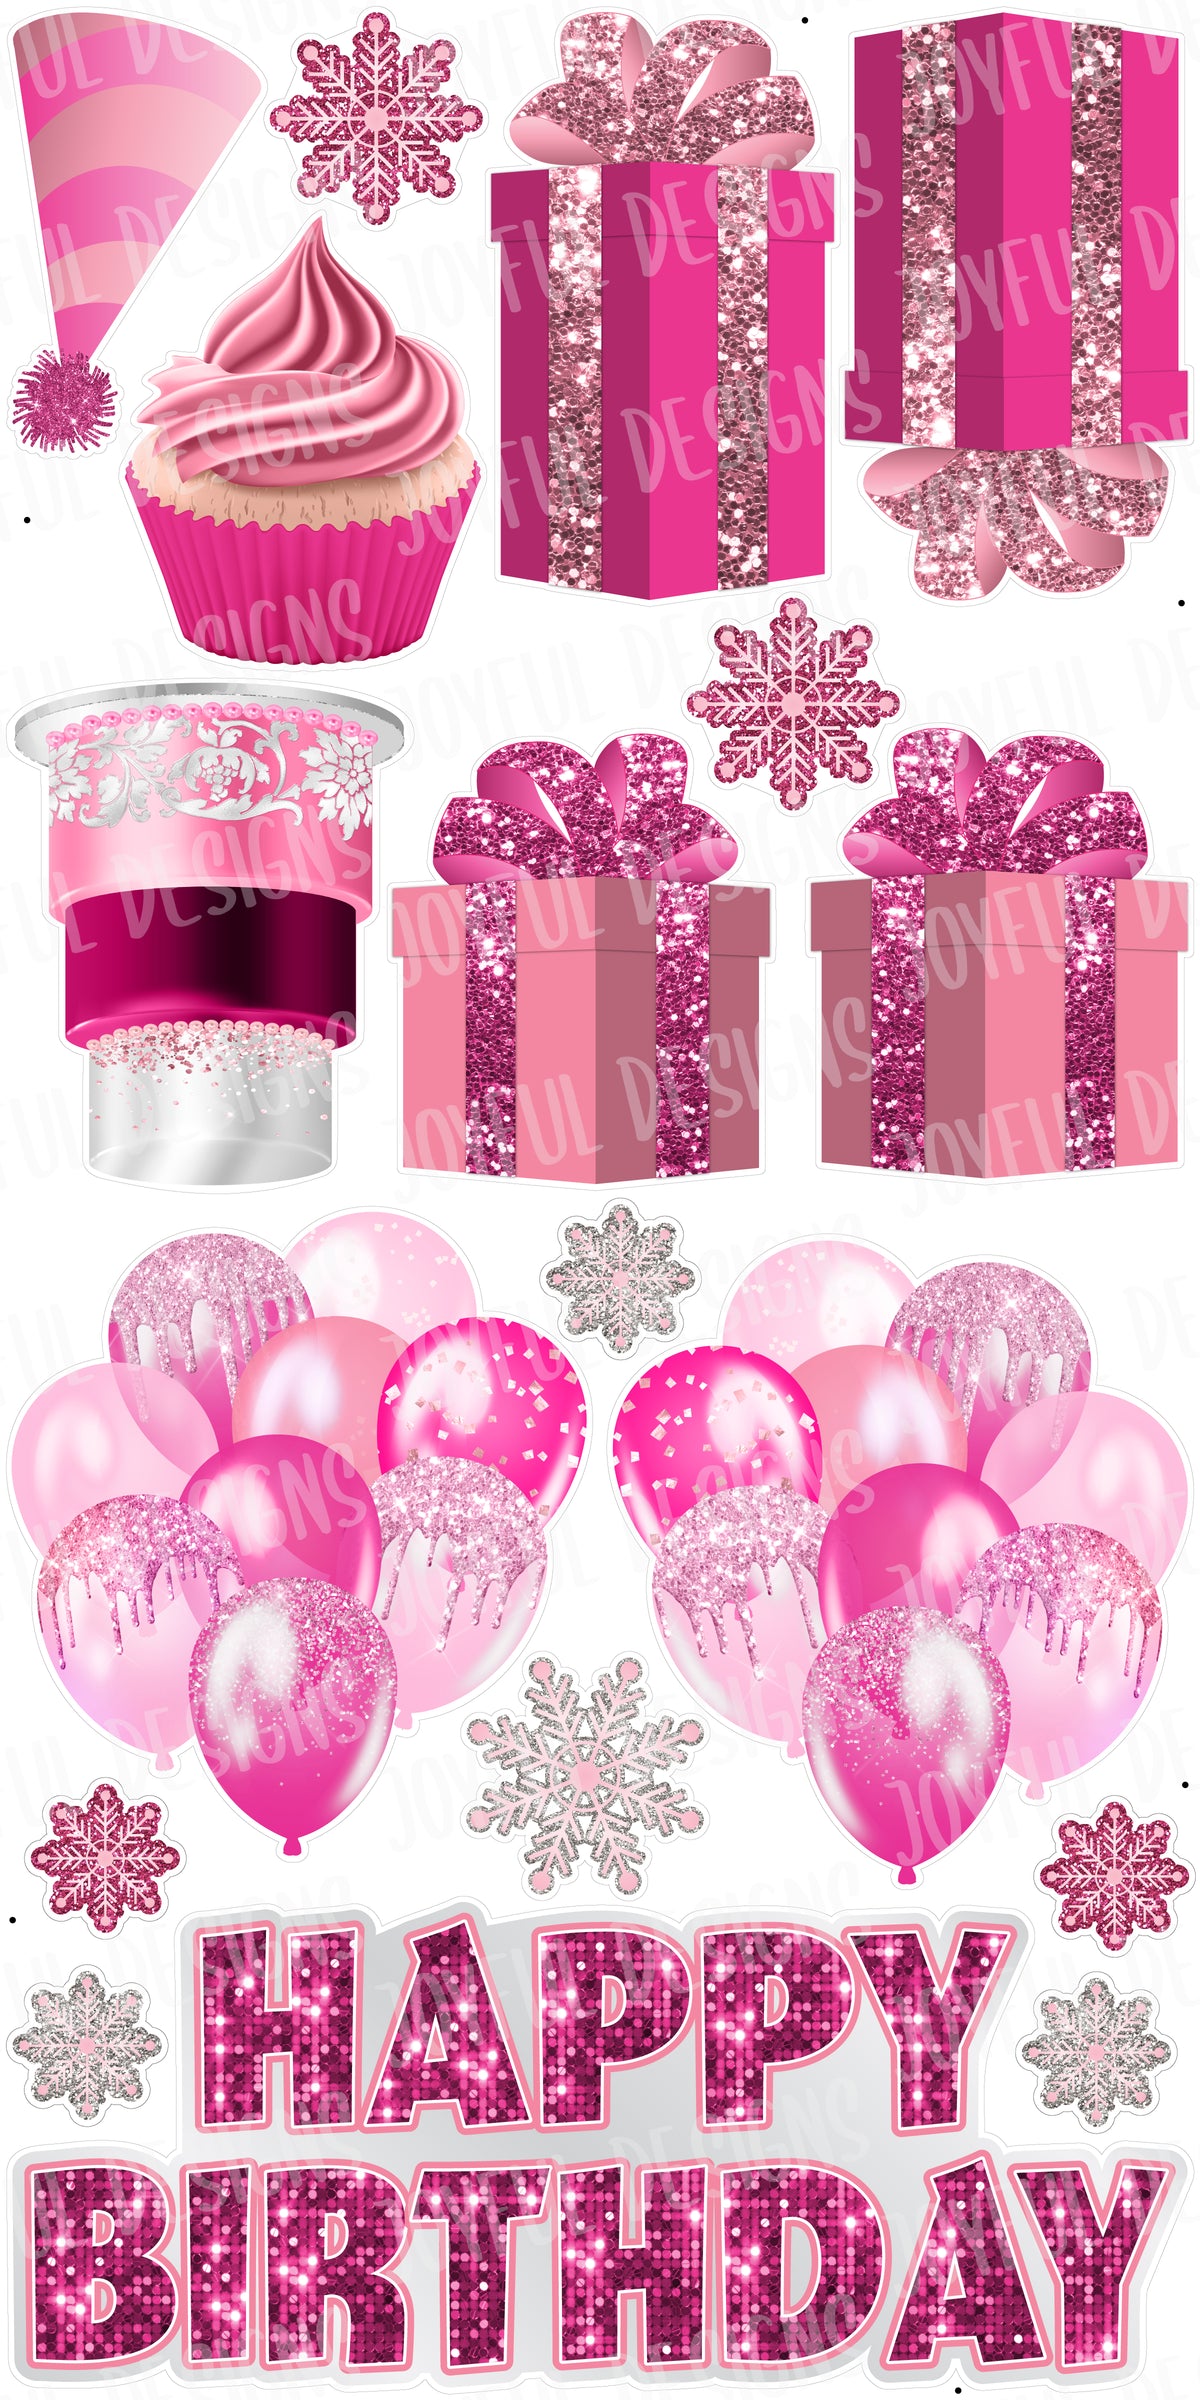 Pretty in Pink with Snowflakes "One and Done" Birthday Centerpiece and Flair Set